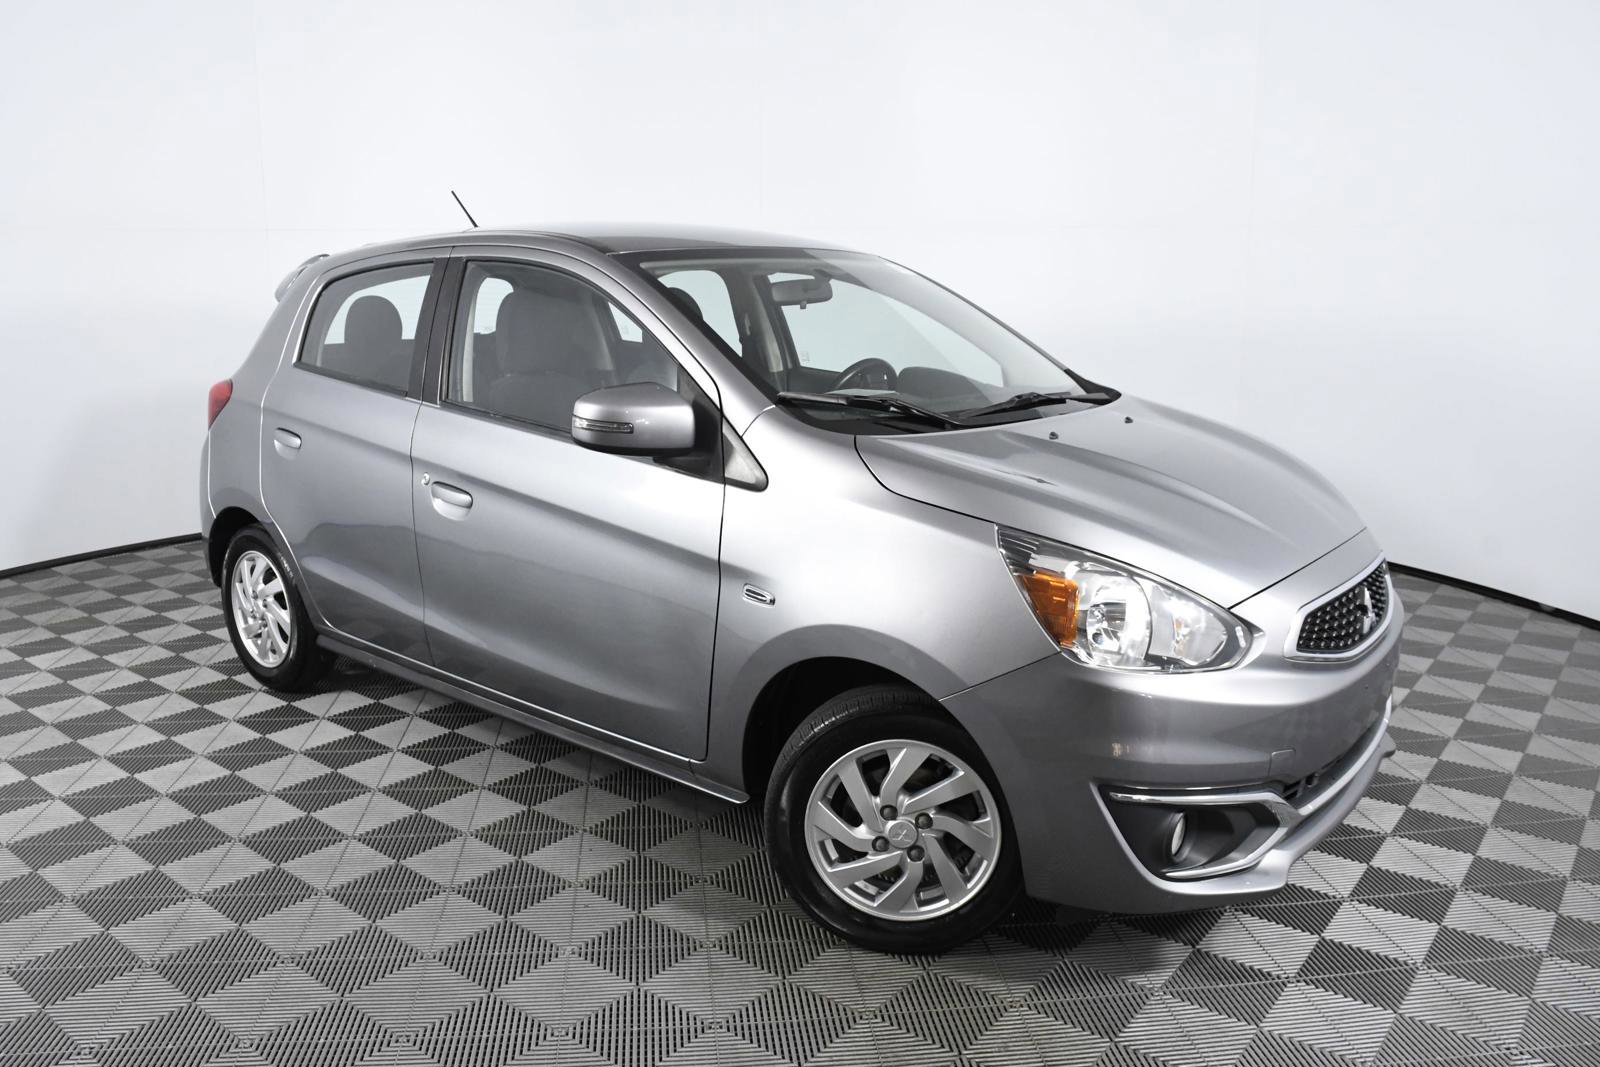 Pre-Owned 2017 Mitsubishi Mirage SE Hatchback in Palmetto Bay #H014319 |  HGreg Nissan Kendall